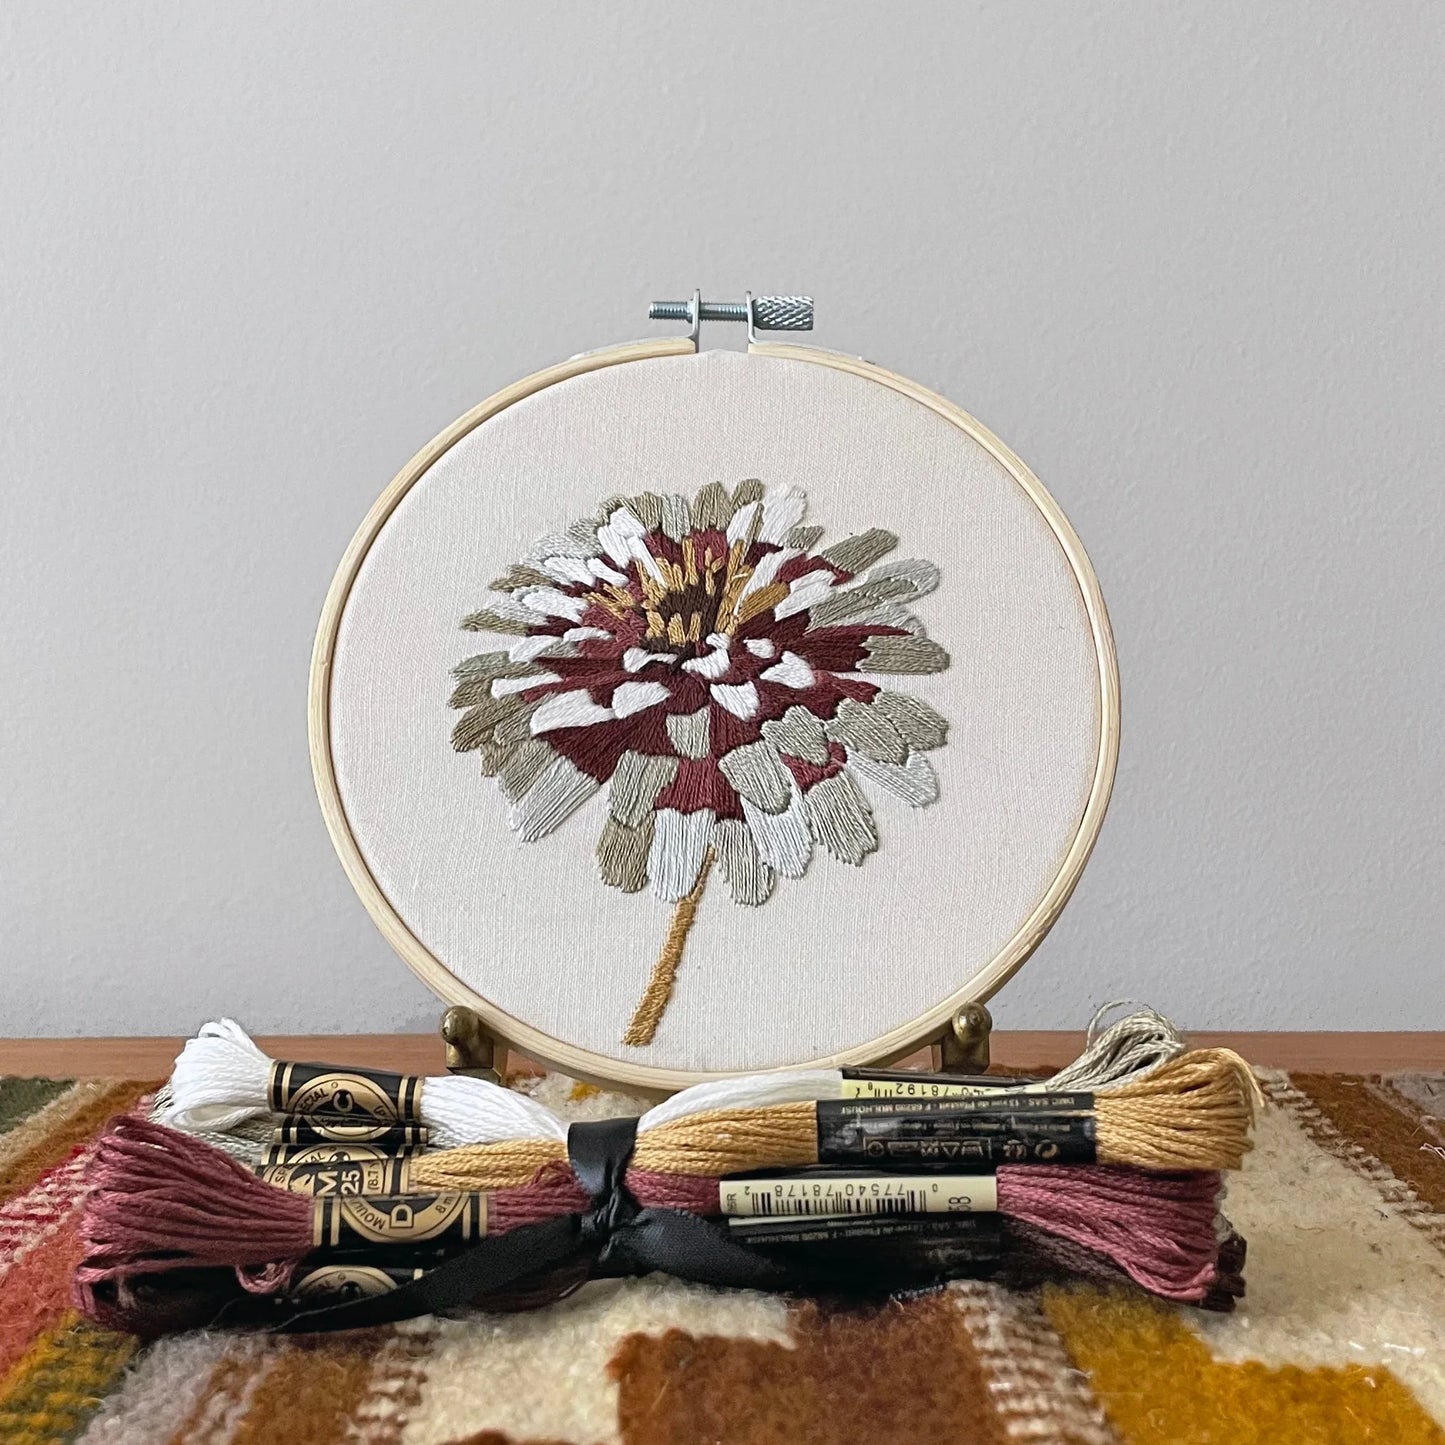 Embroidery Kit by Kate Wyatt